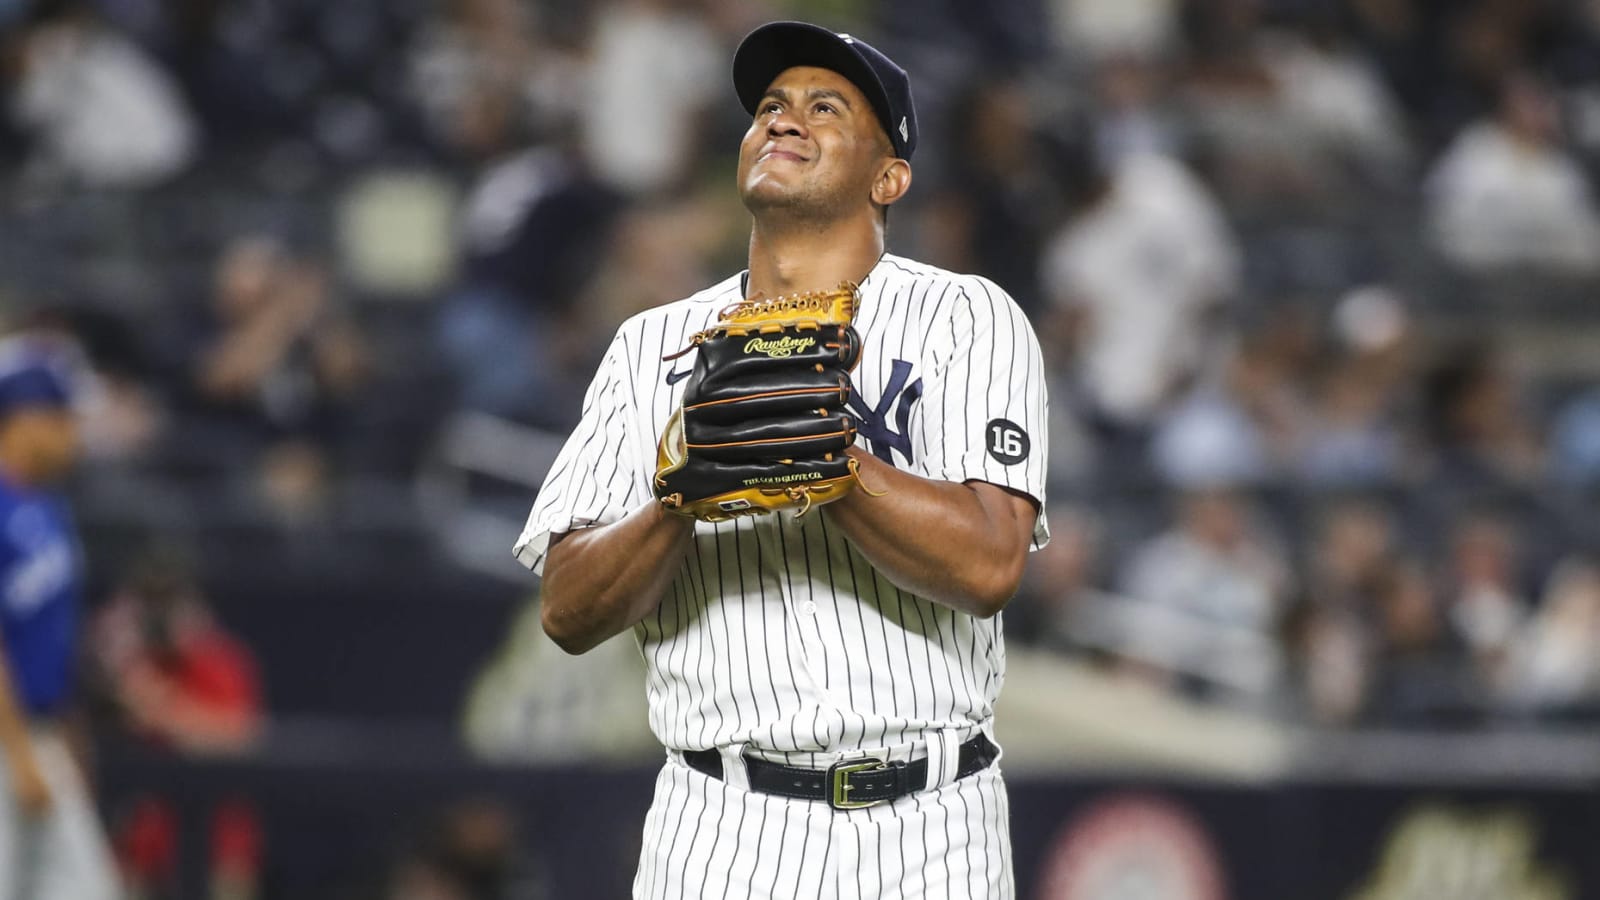 Yankees defend Wandy Peralta over whistling allegations